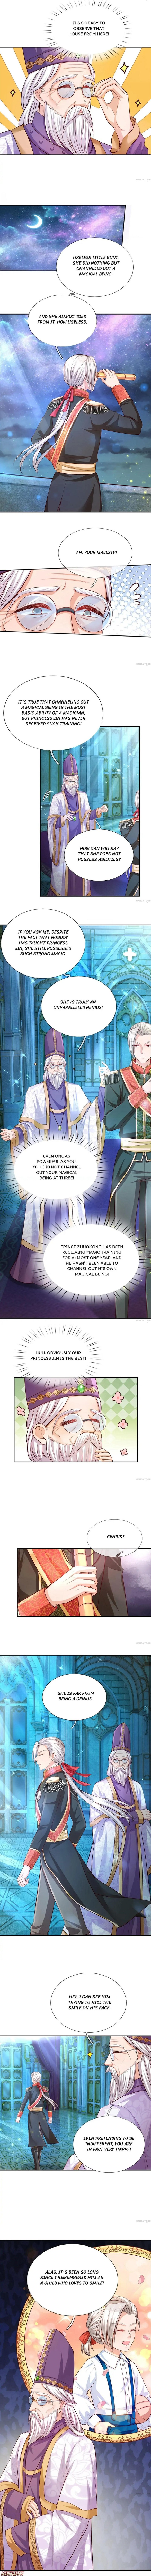 The Beginner’S Guide To Be A Princess - Page 2